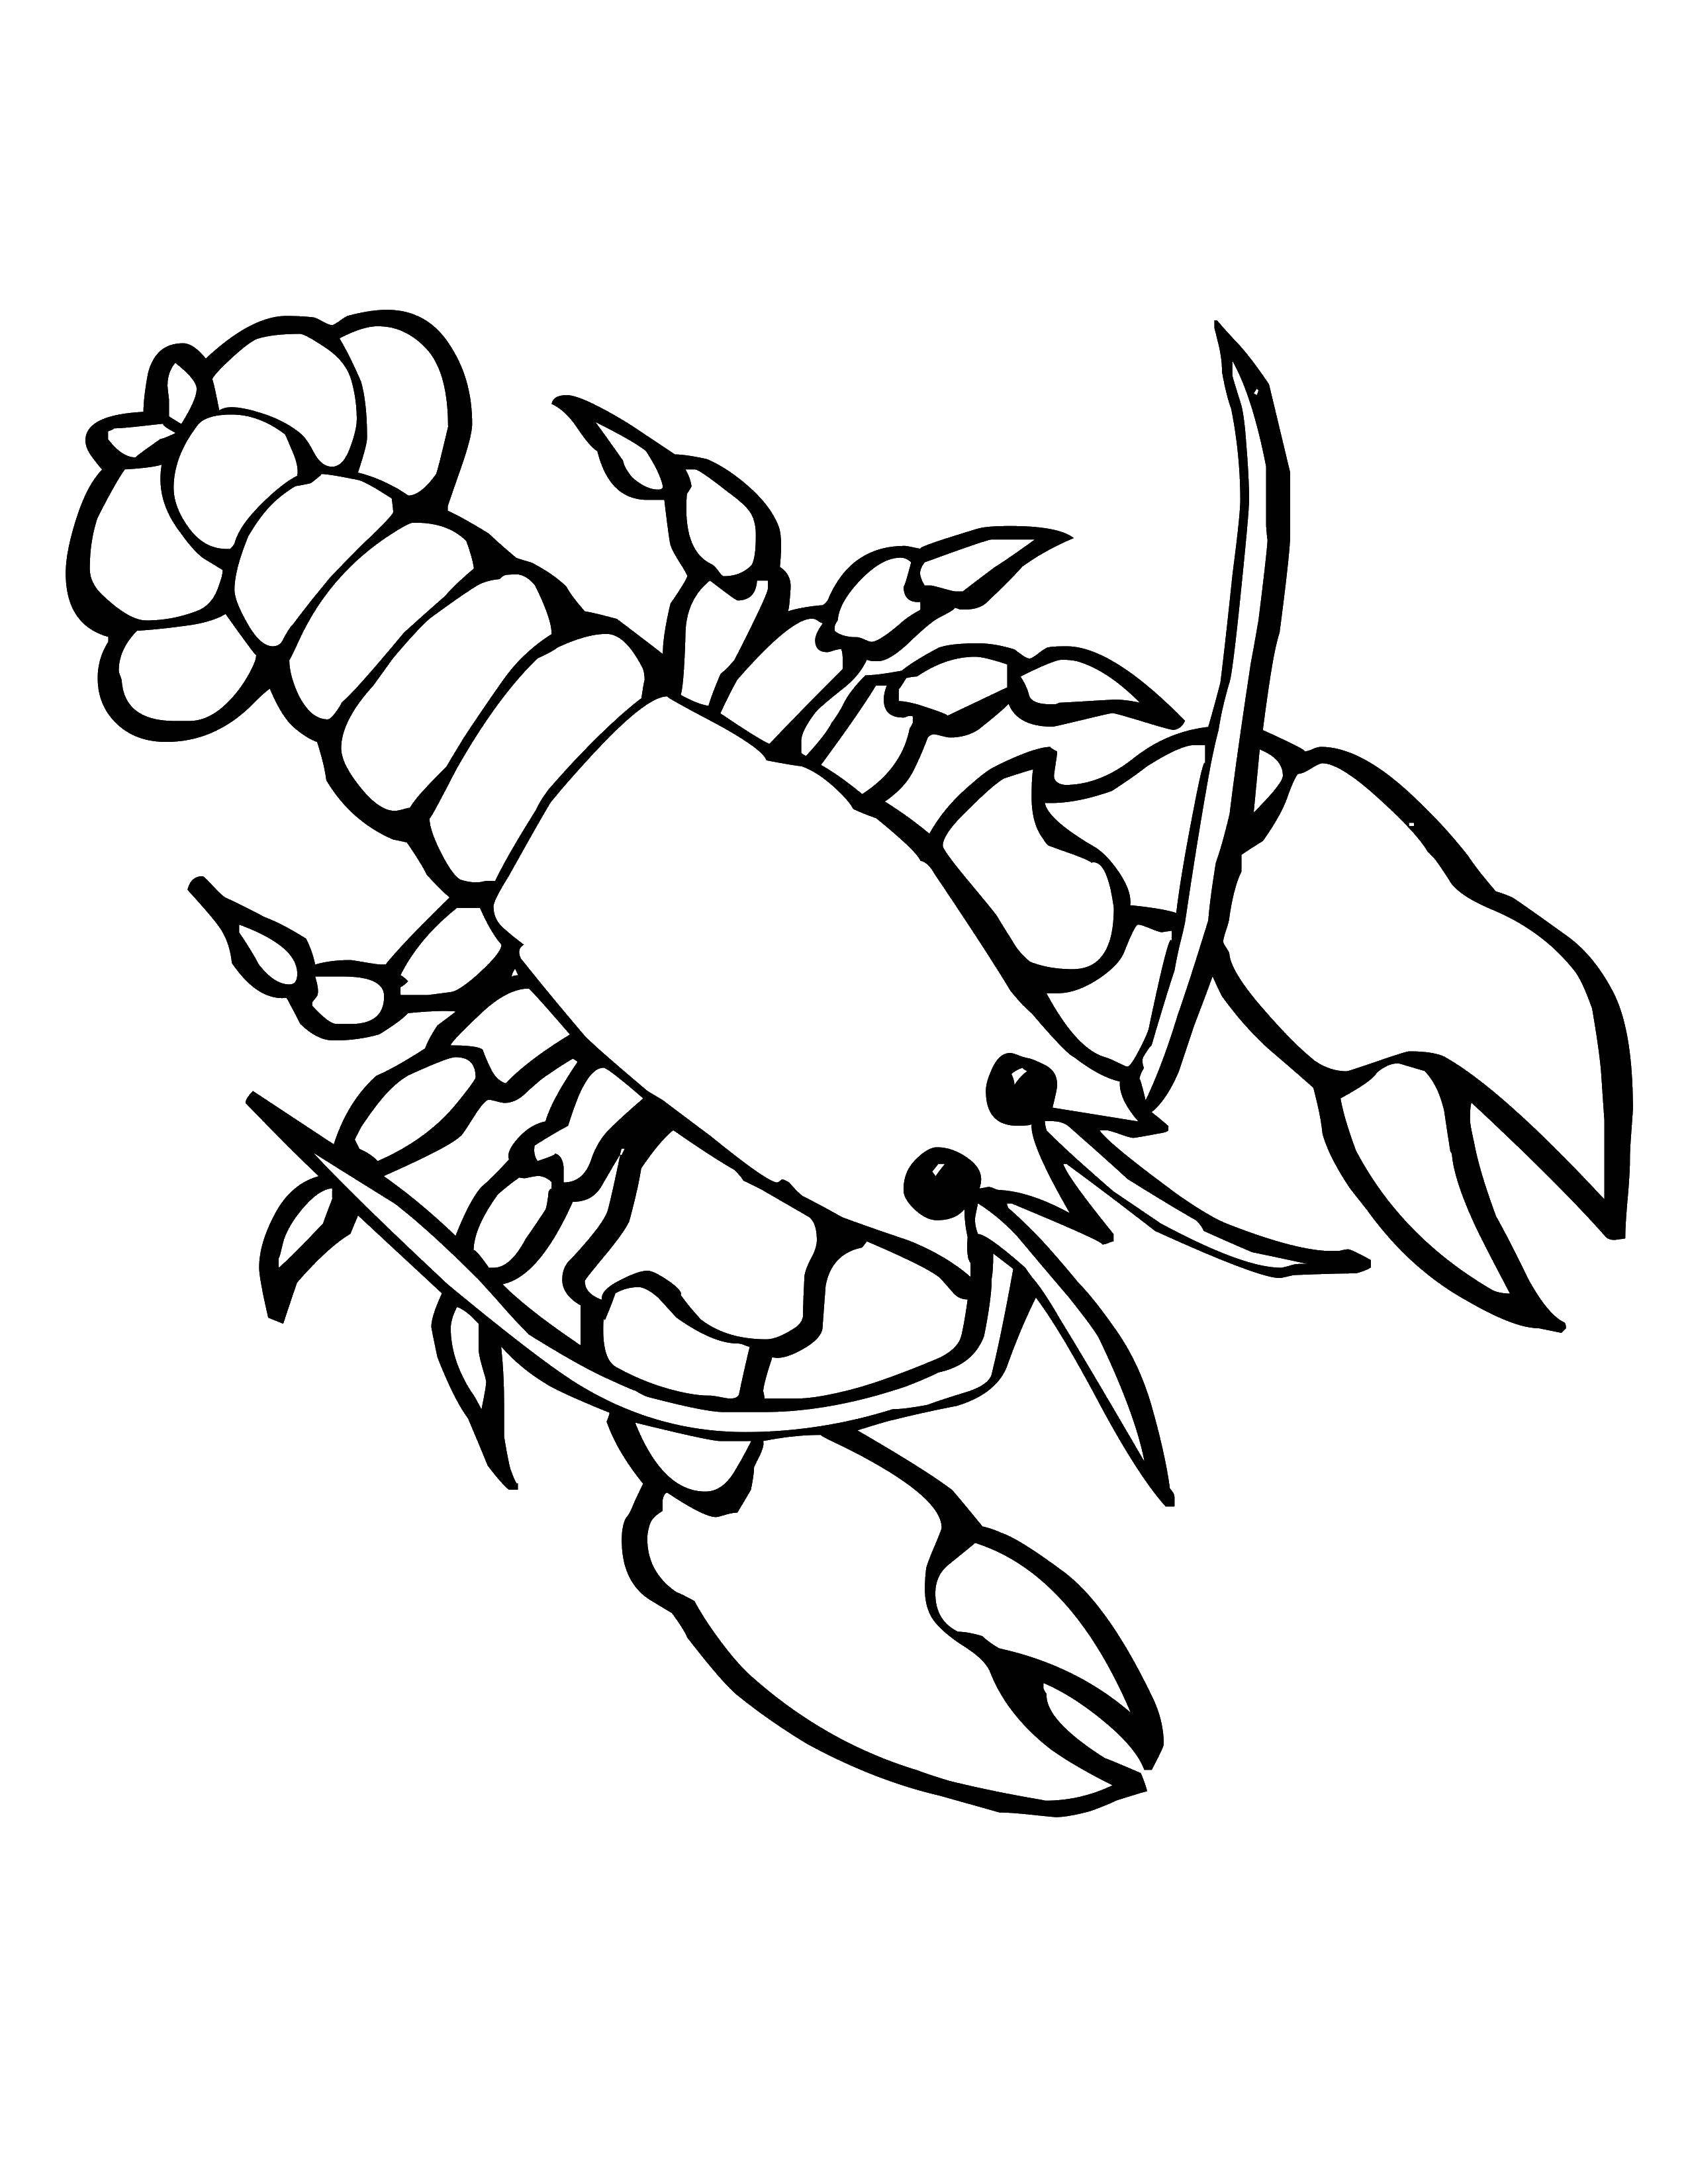 Coloring Lobster with big claws. Category Marine animals. Tags:  Underwater world.